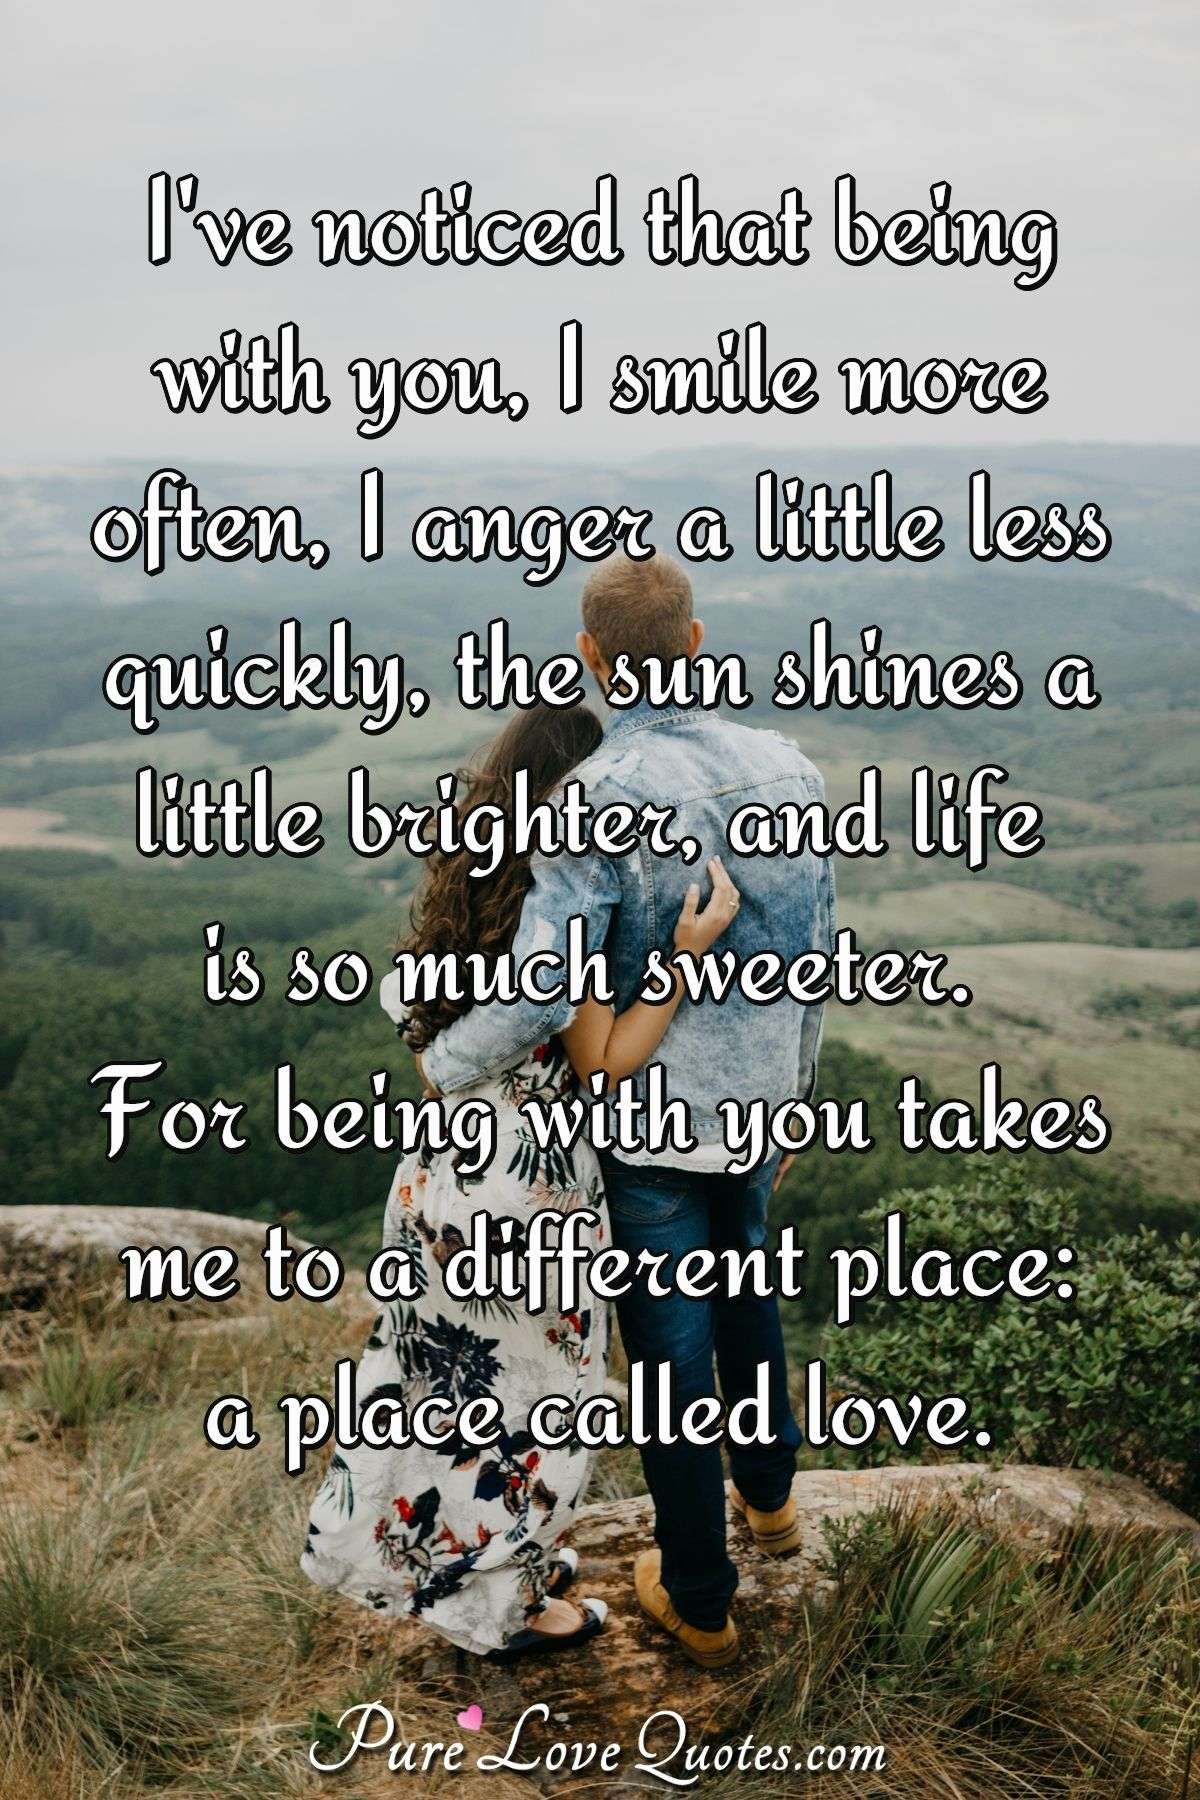 I've noticed that being with you, I smile more often, I anger a little less quickly, the sun shines a little brighter, and life is so much sweeter. For being with you takes me to a different place: a place called love. - Anonymous